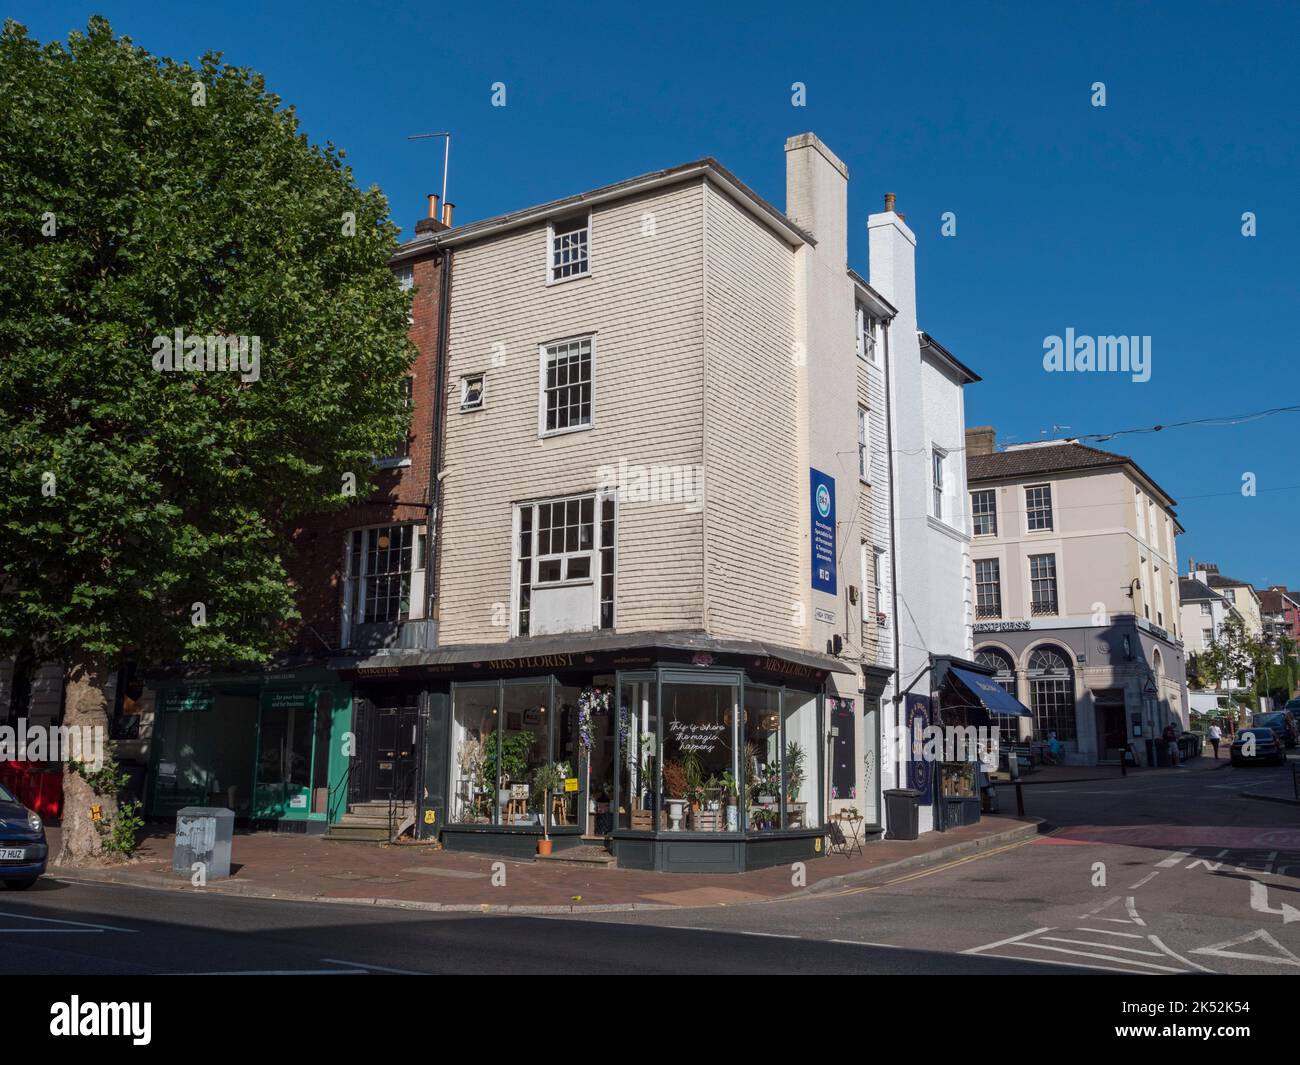 General view of architecture (and Mrs Florist) in Royal Tunbridge Wells, Kent, UK. Stock Photo